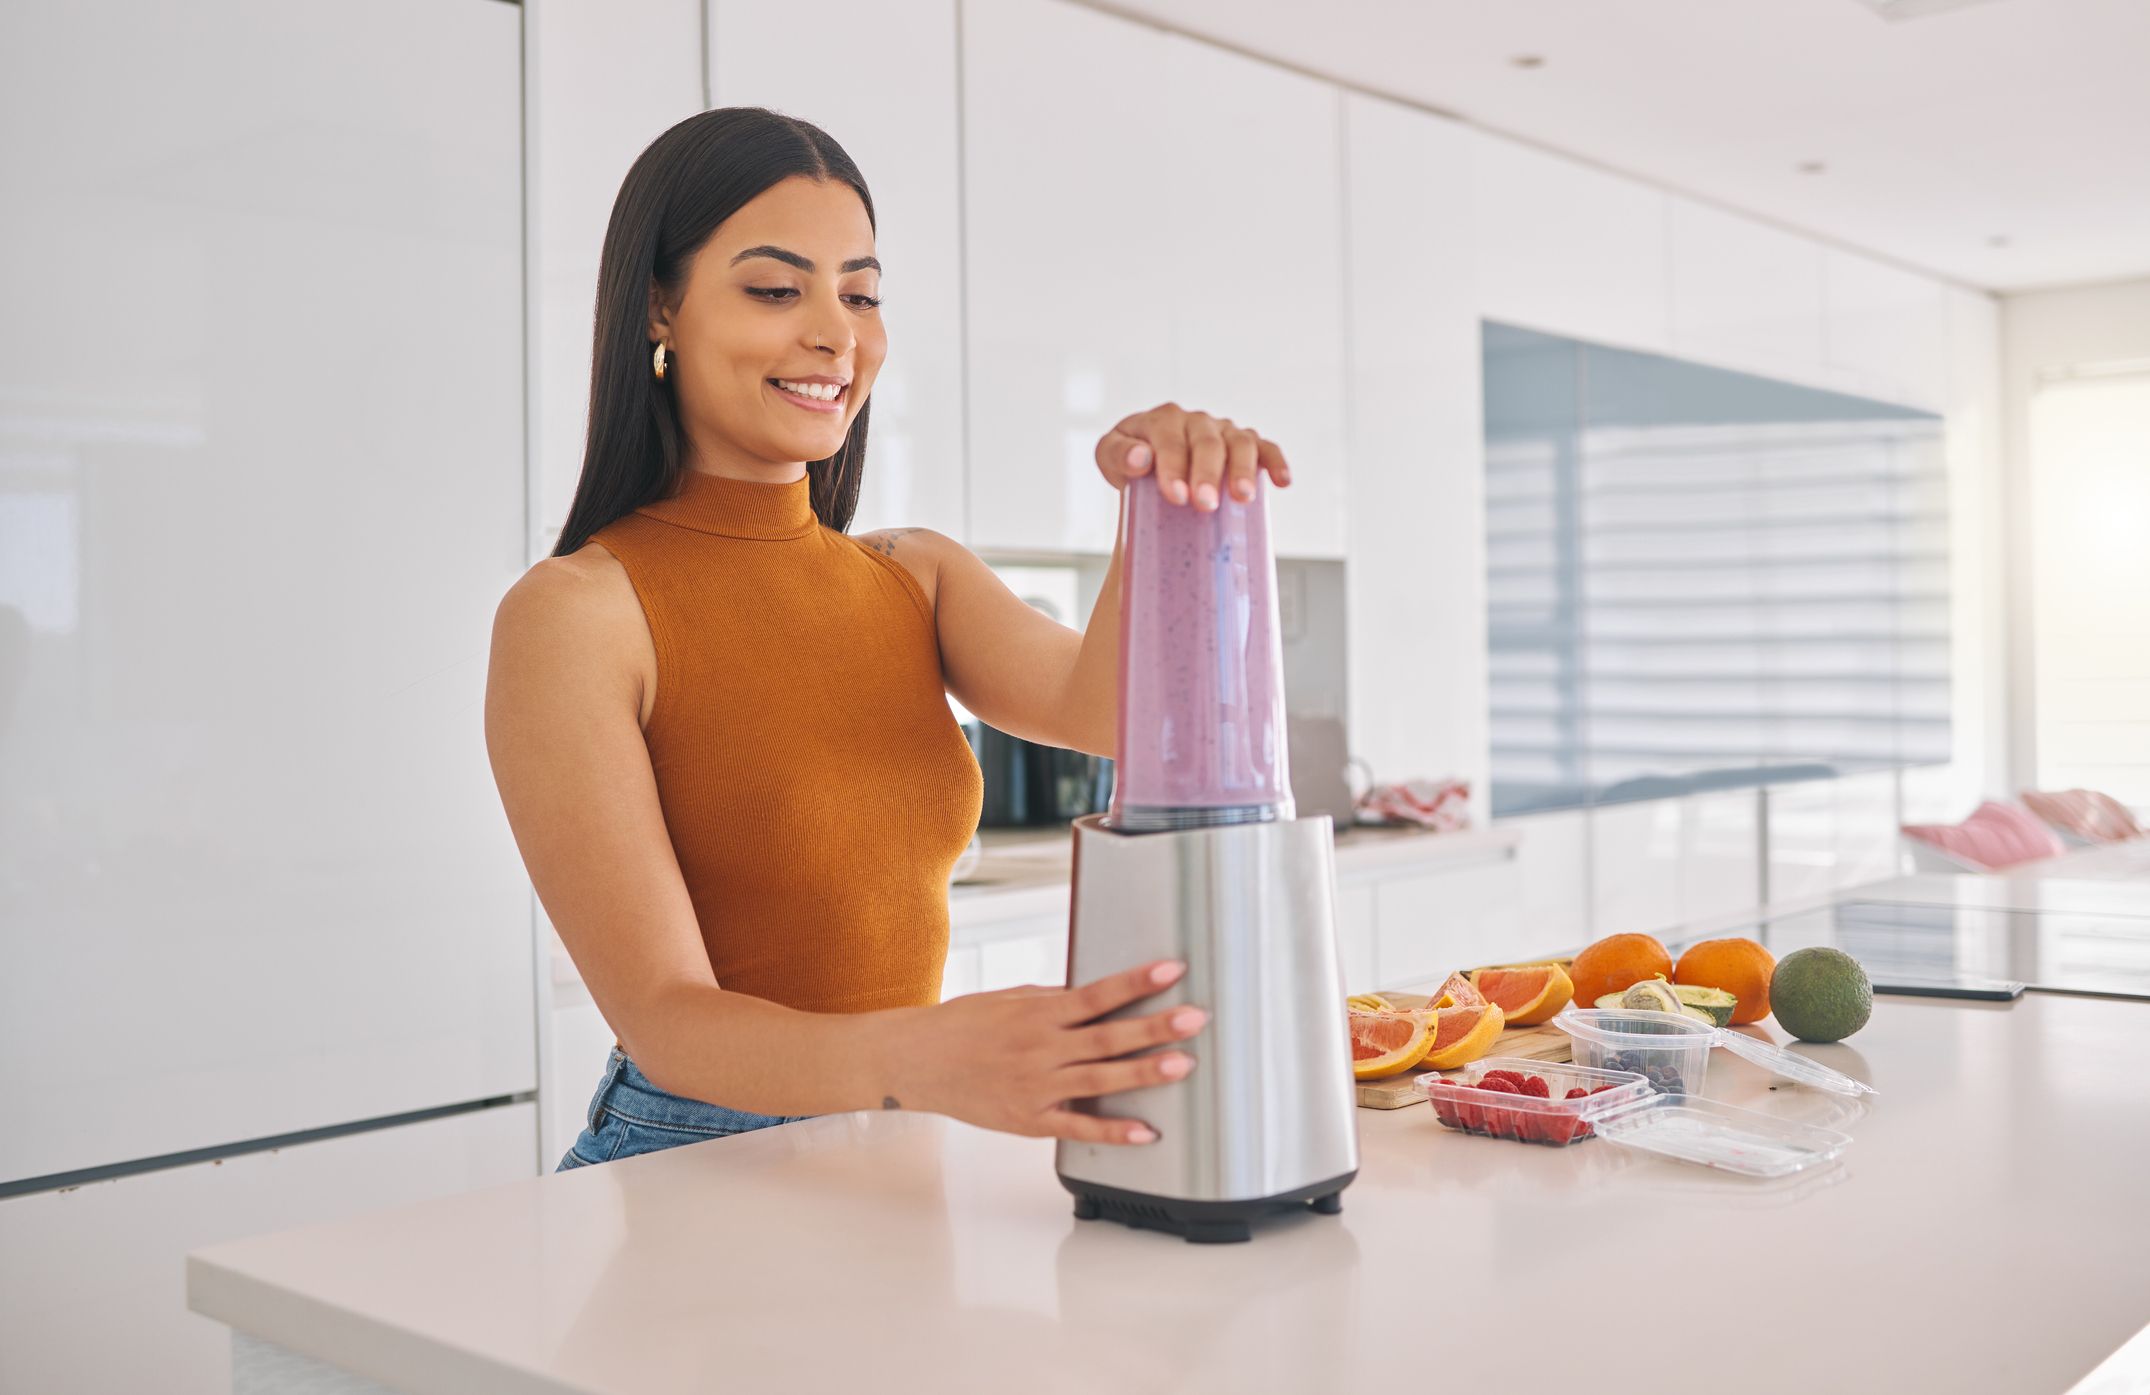 https://hips.hearstapps.com/hmg-prod/images/shot-of-a-woman-preparing-a-smoothie-in-the-kitchen-royalty-free-image-1702420006.jpg